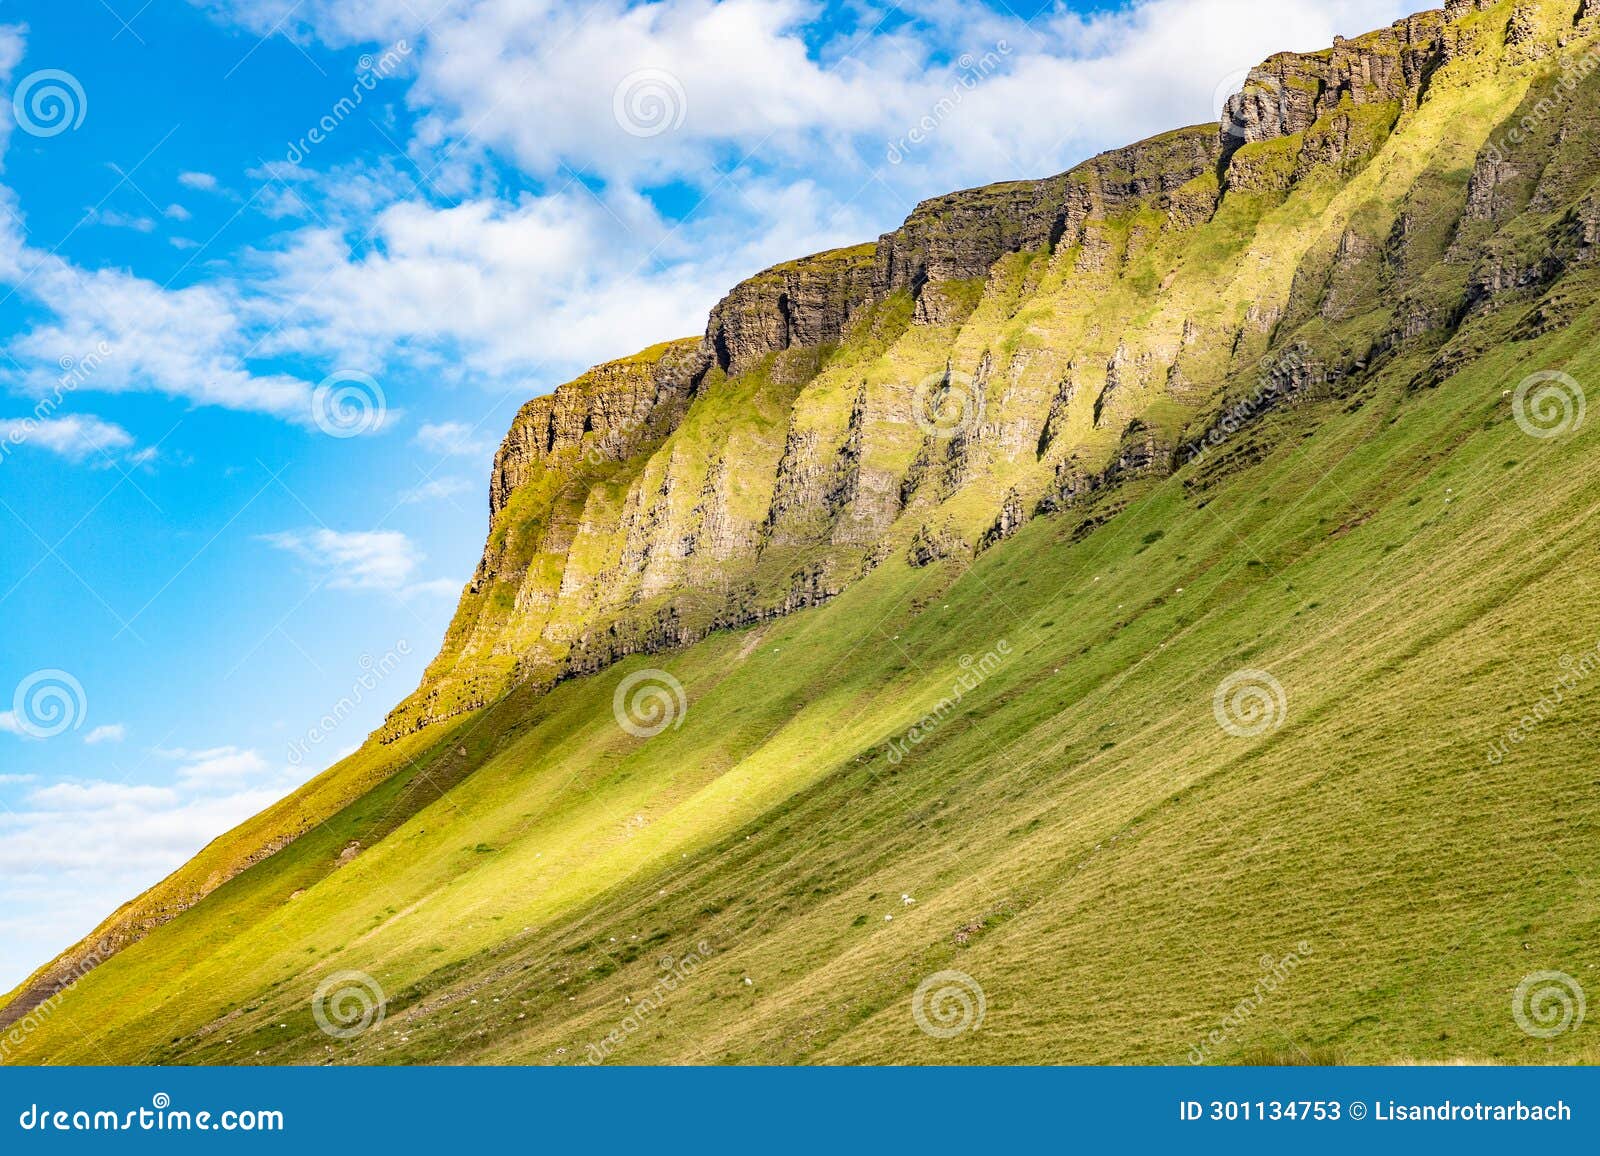 benbulbin mountain with rocks and vegetation